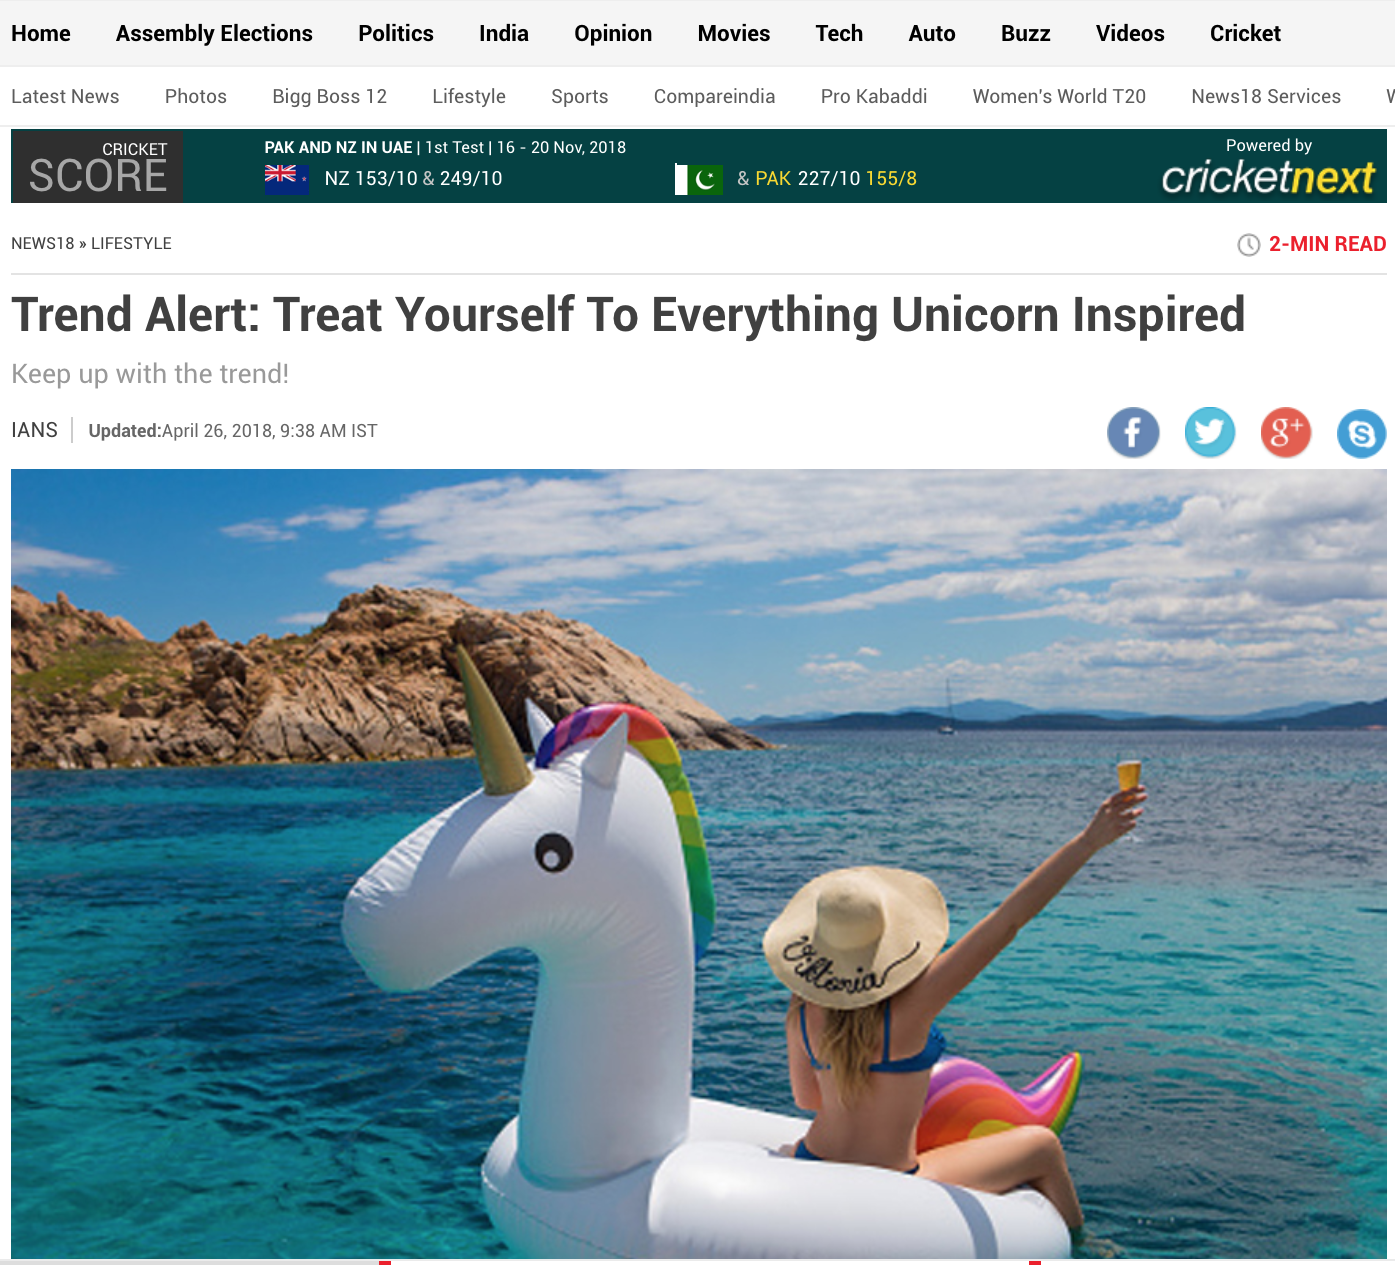 NEWS18 | Trend Alert: Treat Yourself To Everything Unicorn Inspired